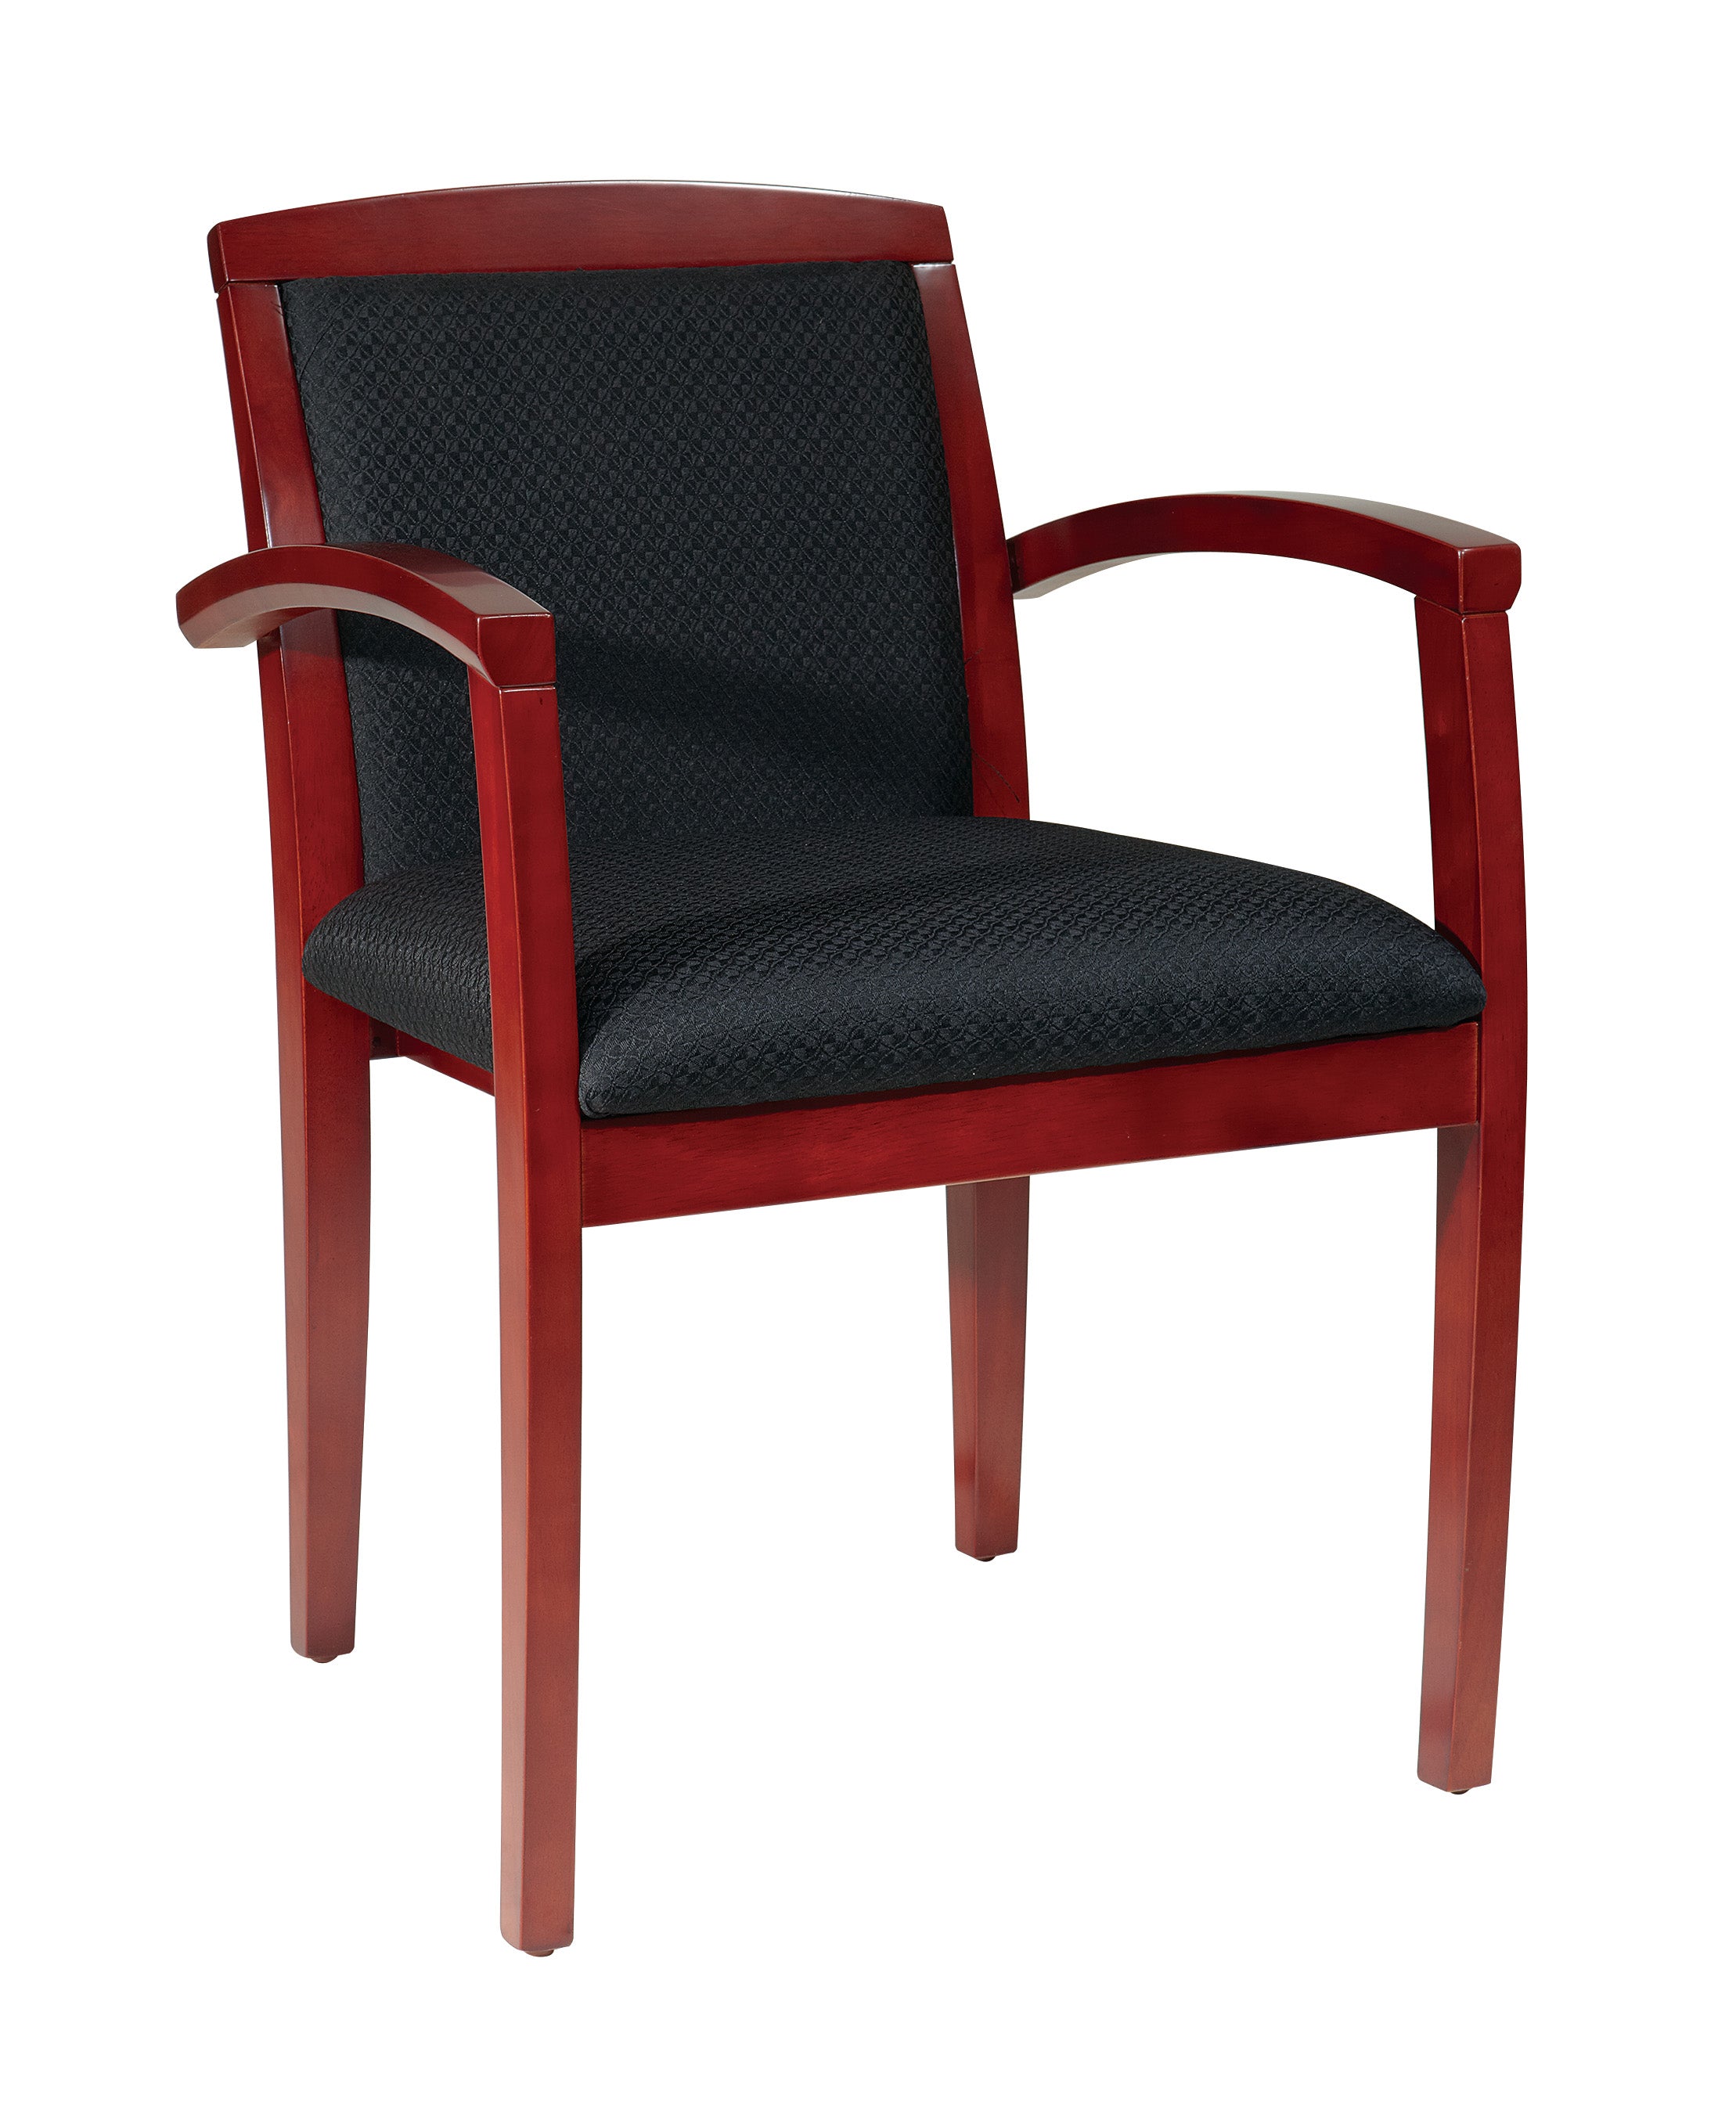 Leg Chair With Upholstered Back And Sonoma Cherry Finish